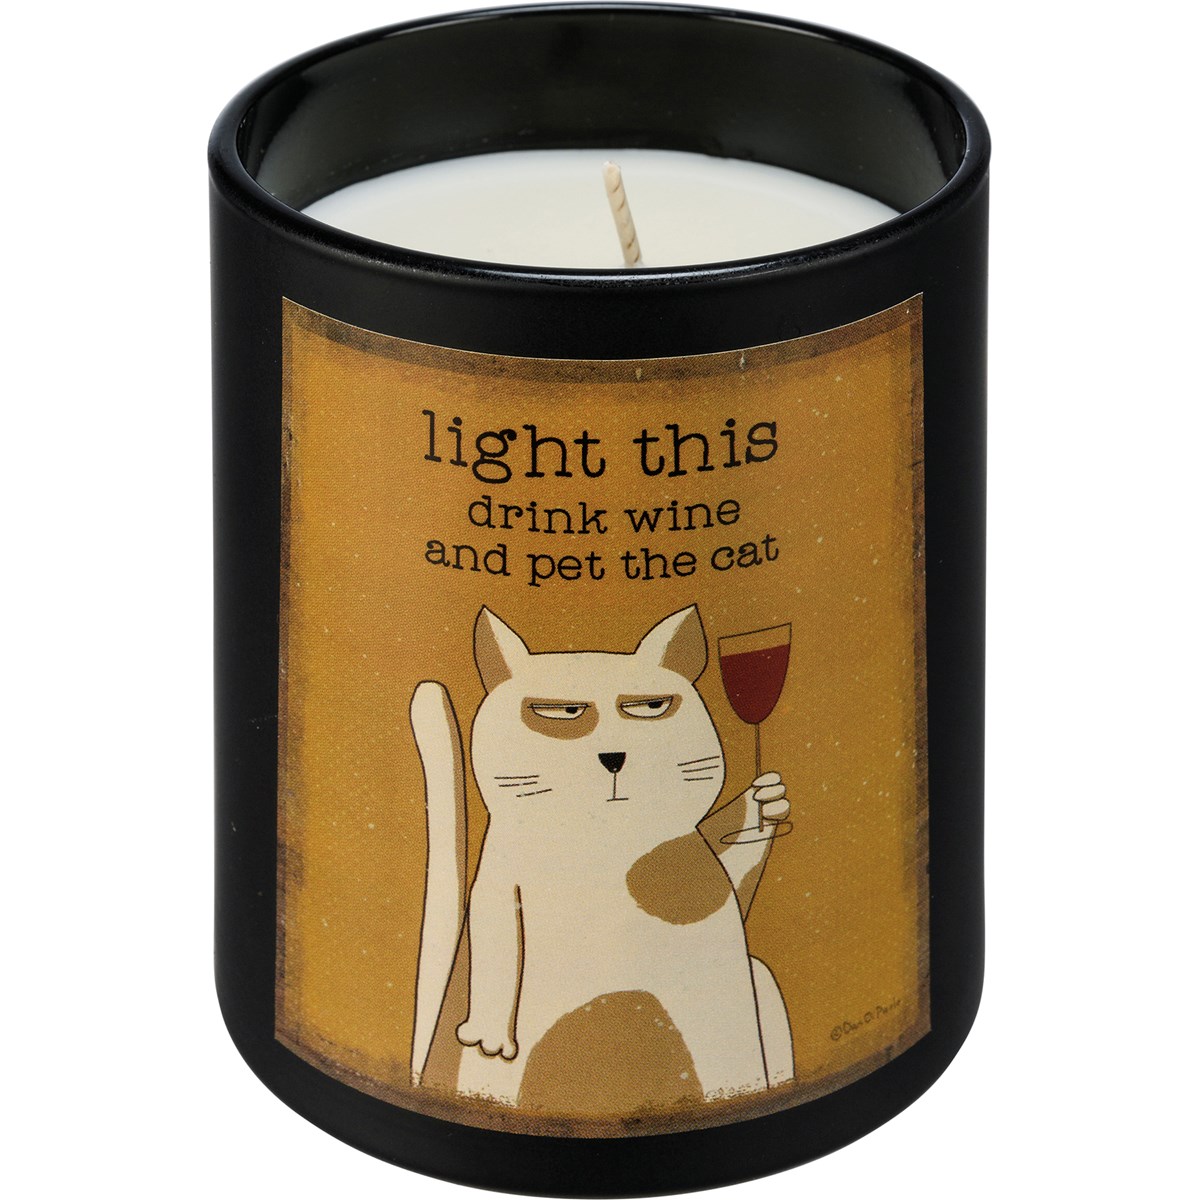 Light This Drink Wine And Pet The Cat Candle - Soy Wax, Glass, Cotton